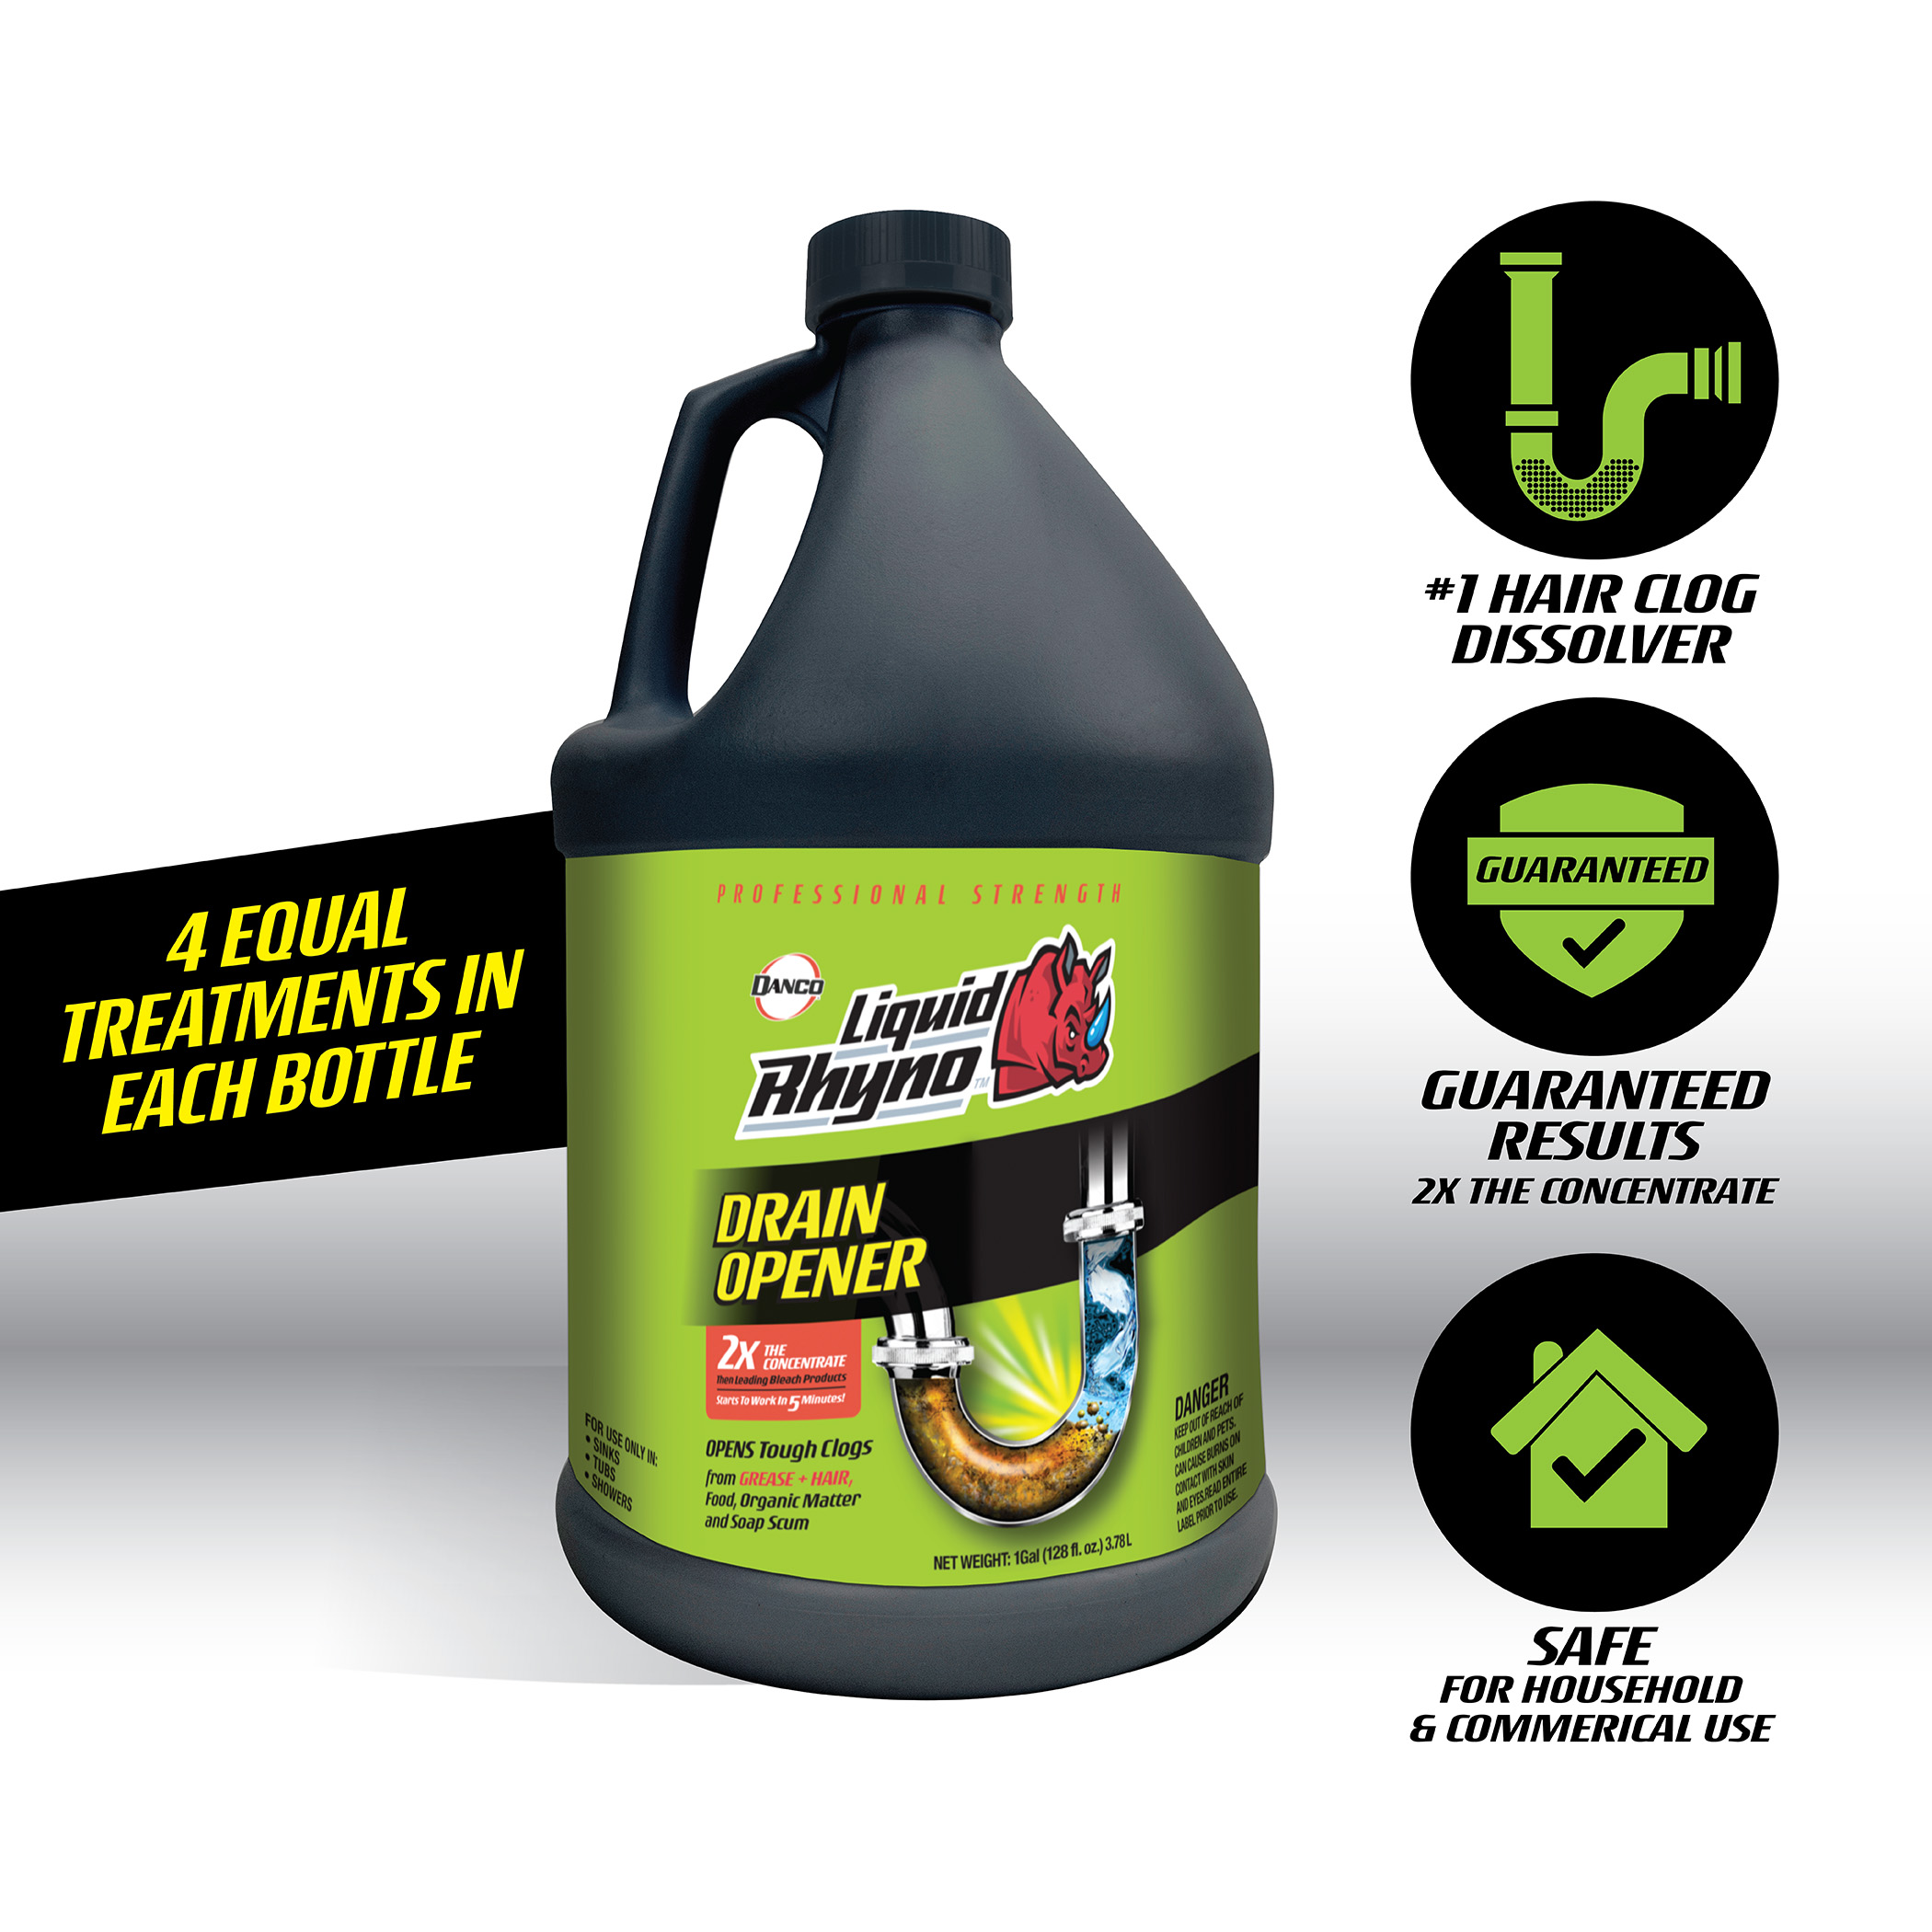 Everything You Need | Professional Slow Drain Cleaner And Clog Remover - 10  Foot | 1